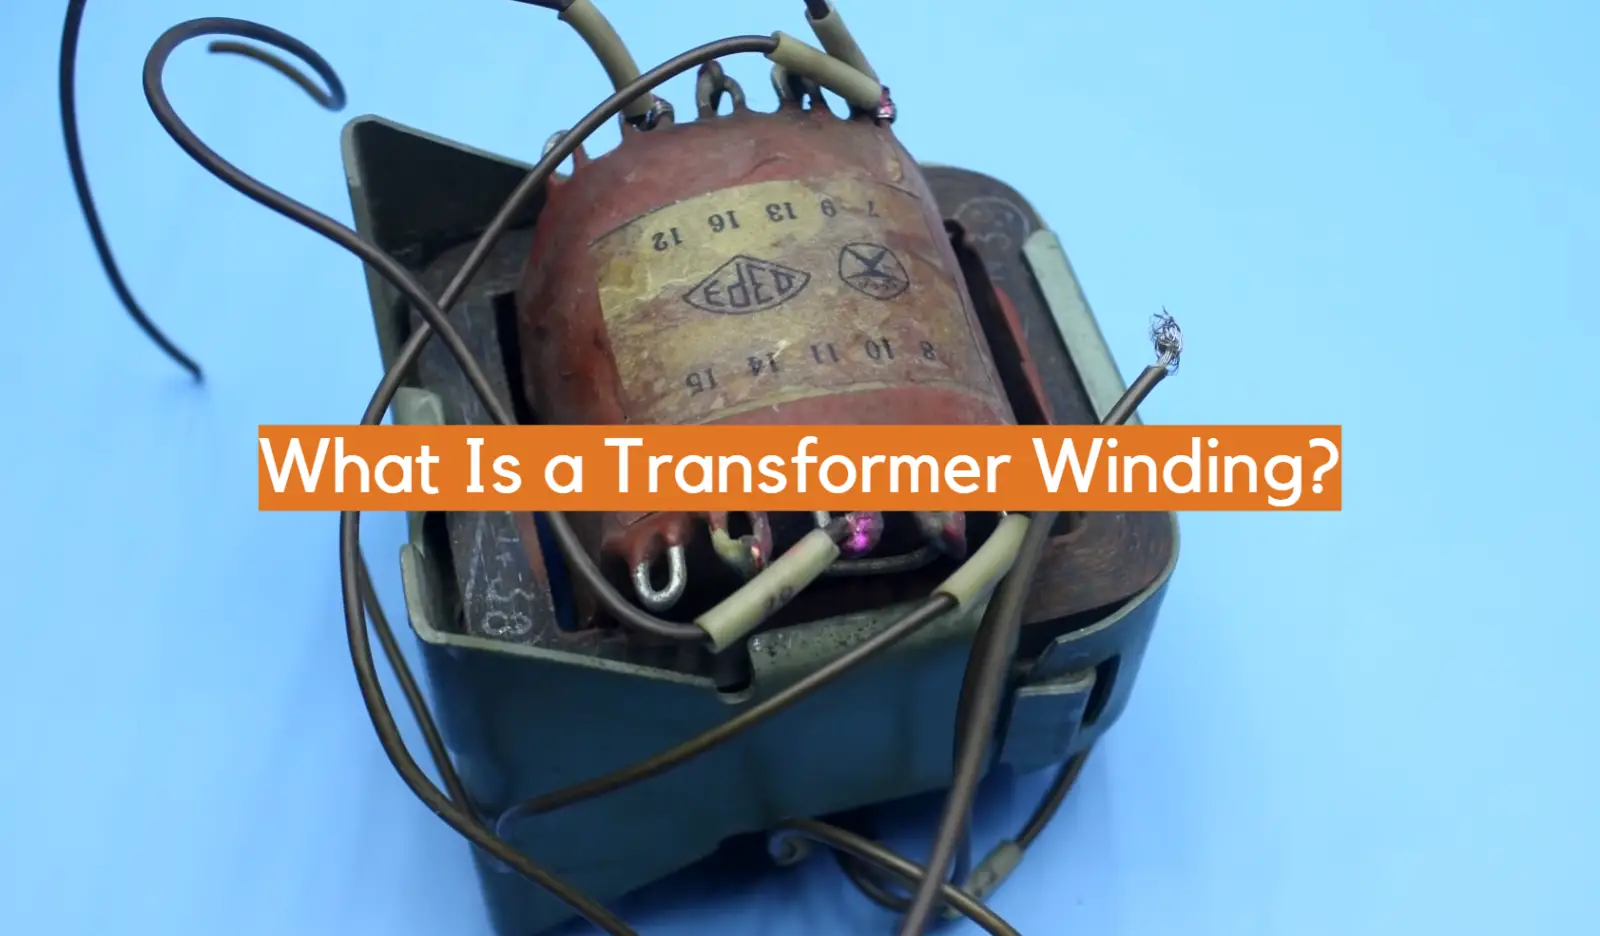 What Is a Transformer Winding?